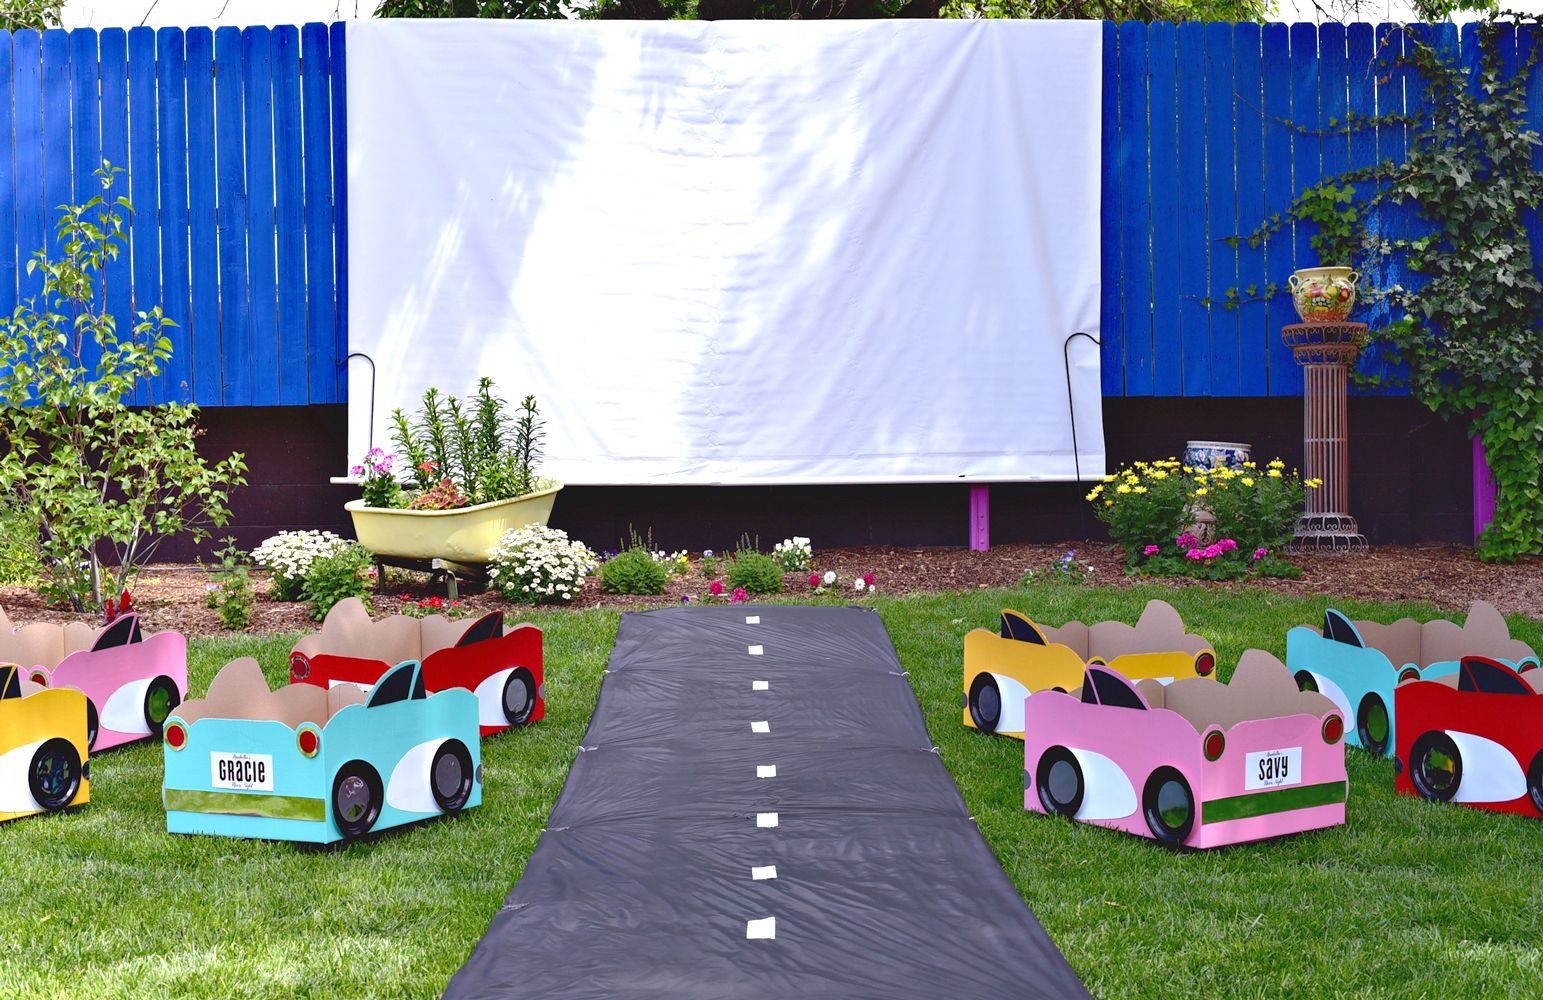 Movie Theater Birthday Party Ideas
 Drive in movie theater for a movie night birthday party